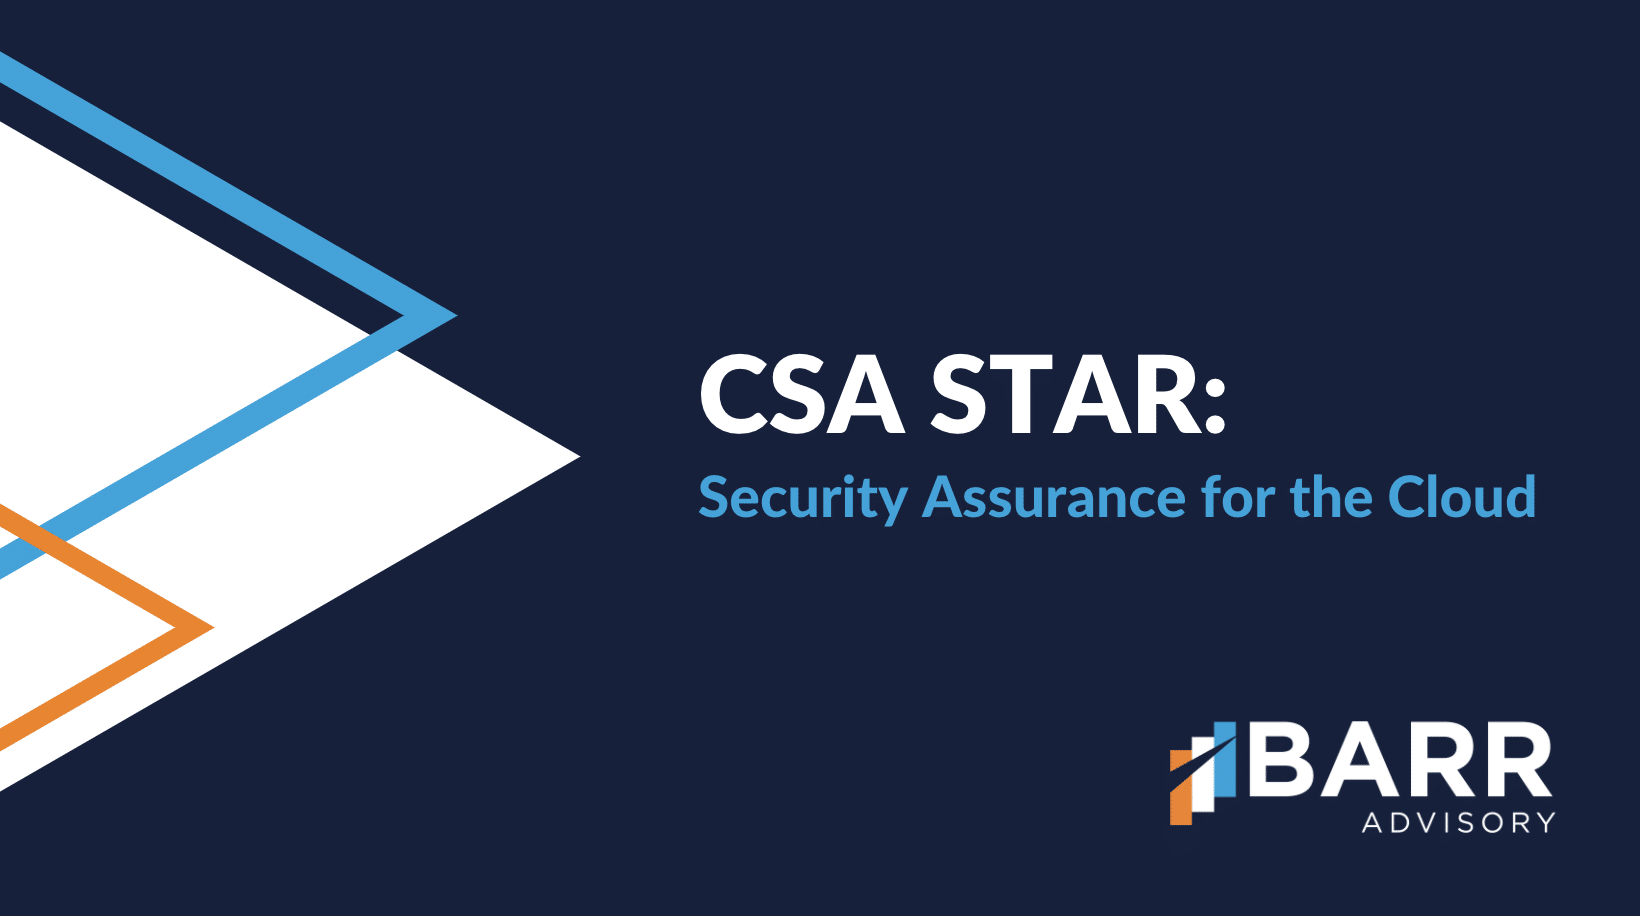 CSA STAR: How it Works and Why to Choose BARR Advisory